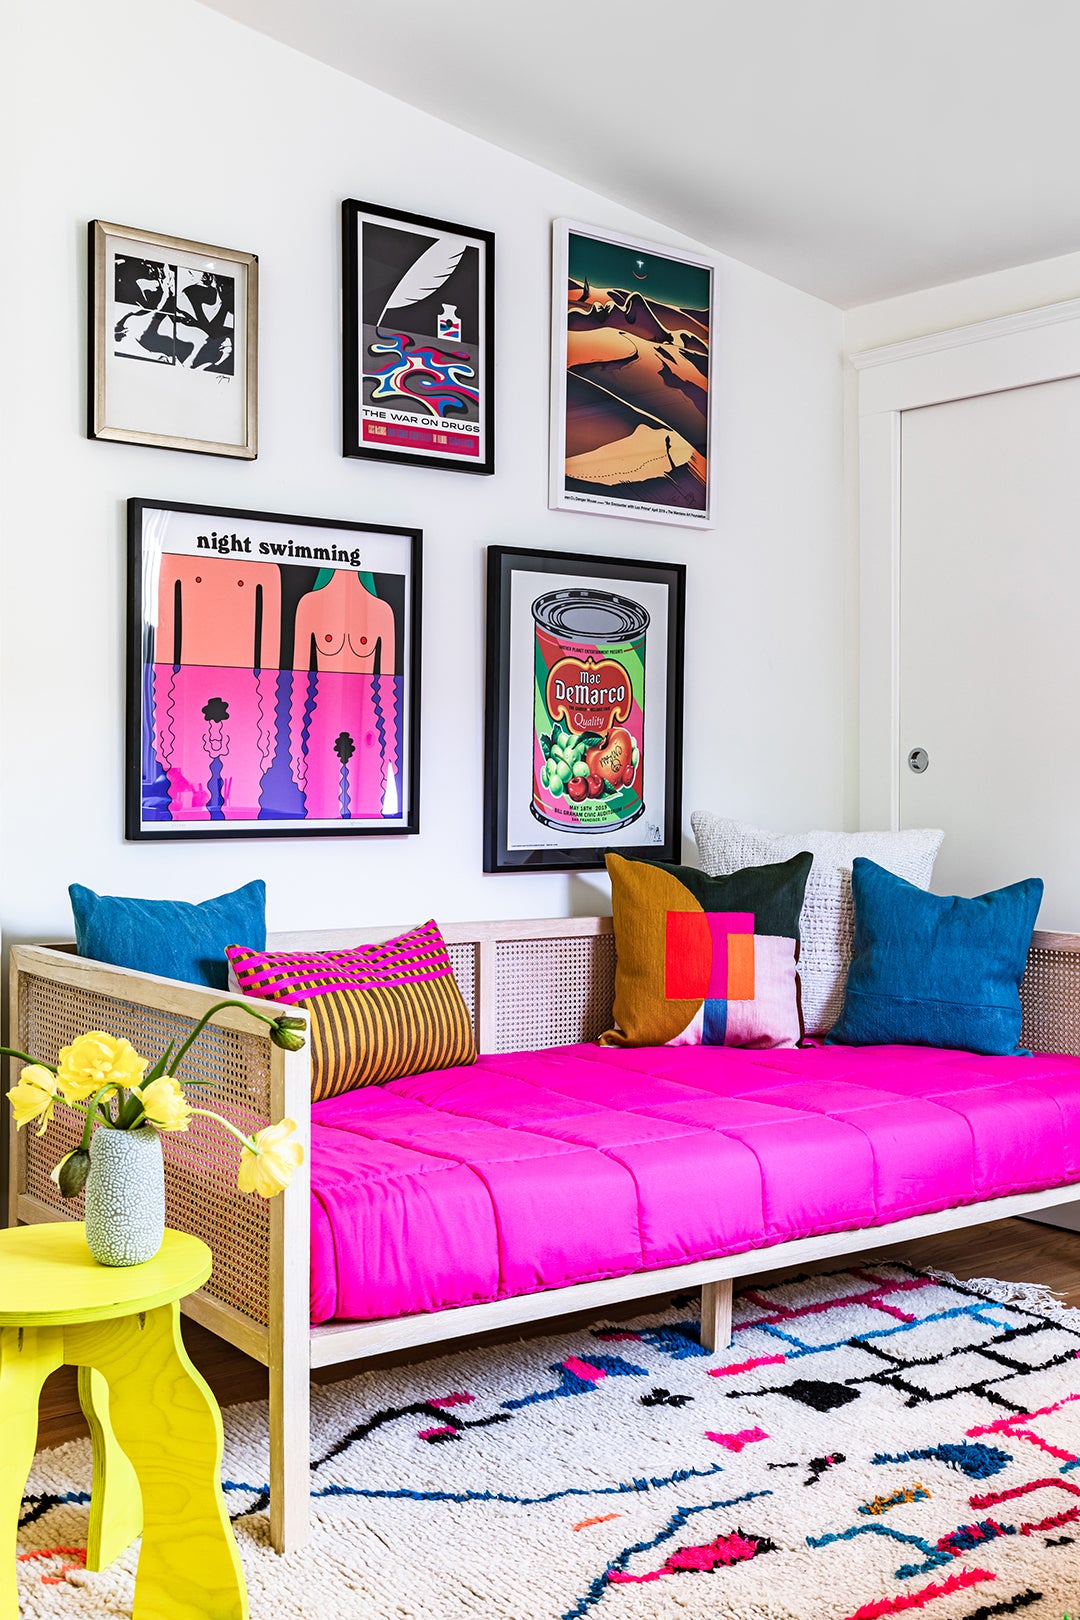 Guest room with bright pink comforter on day bed